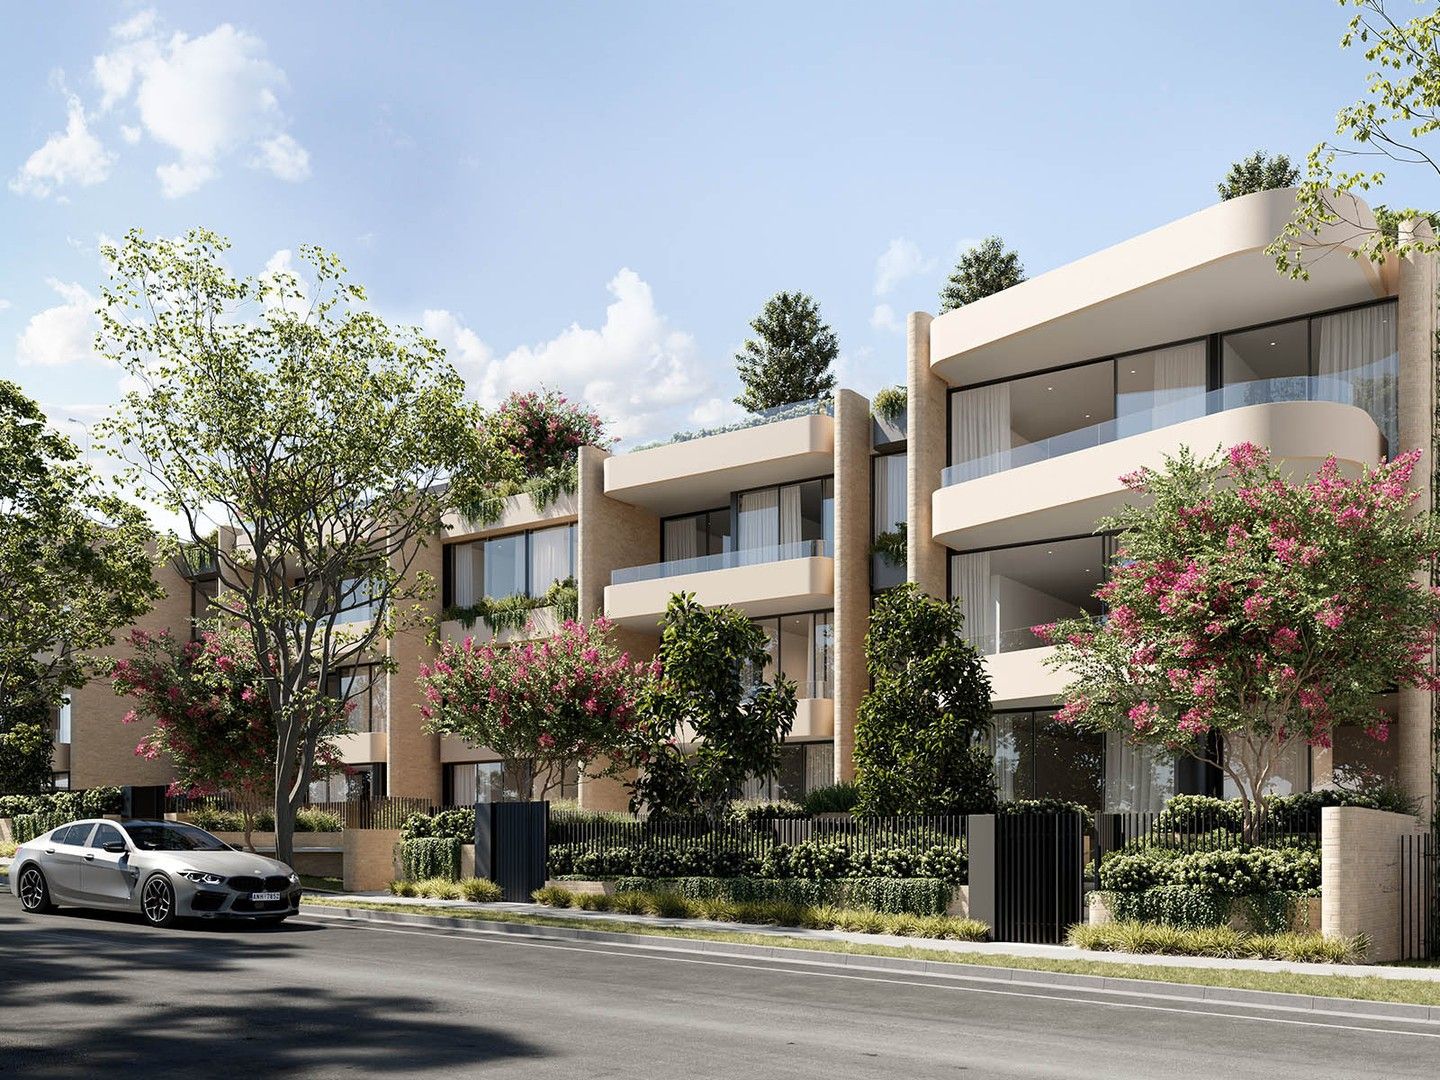 3 bedrooms New Apartments / Off the Plan in  CROWS NEST NSW, 2065